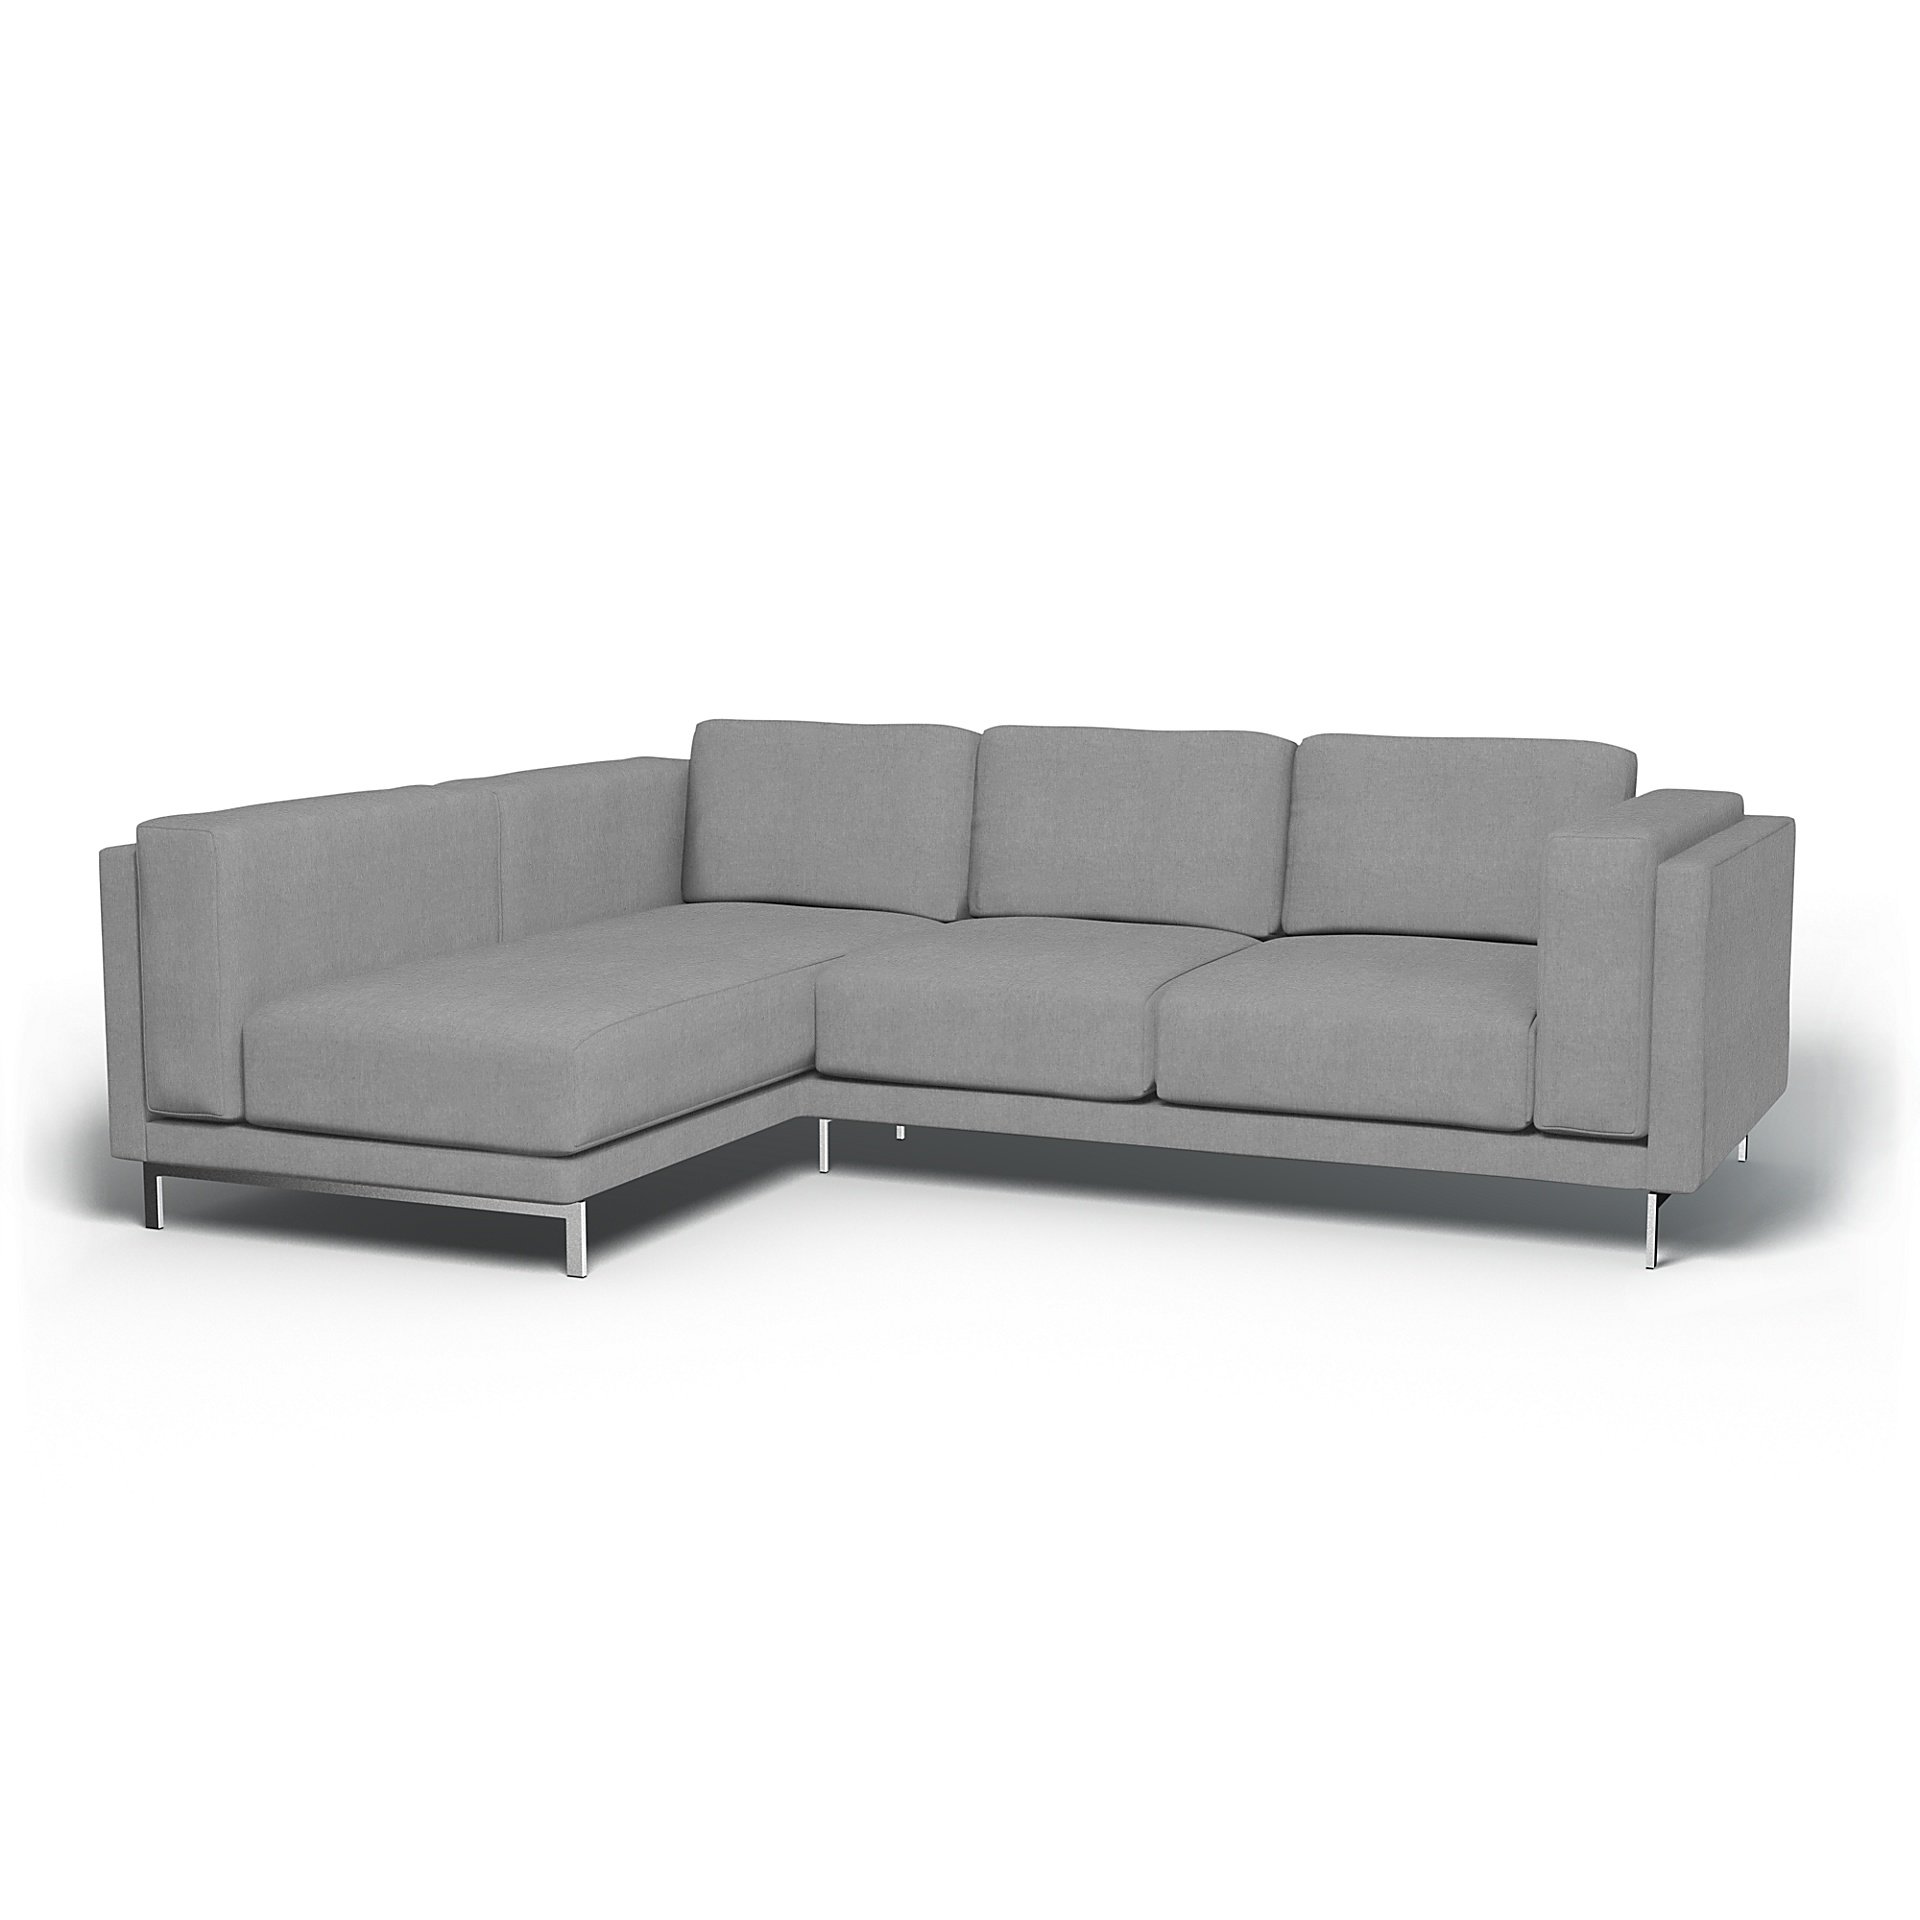 IKEA - Nockeby 3 Seater Sofa with Left Chaise Cover, Graphite, Linen - Bemz